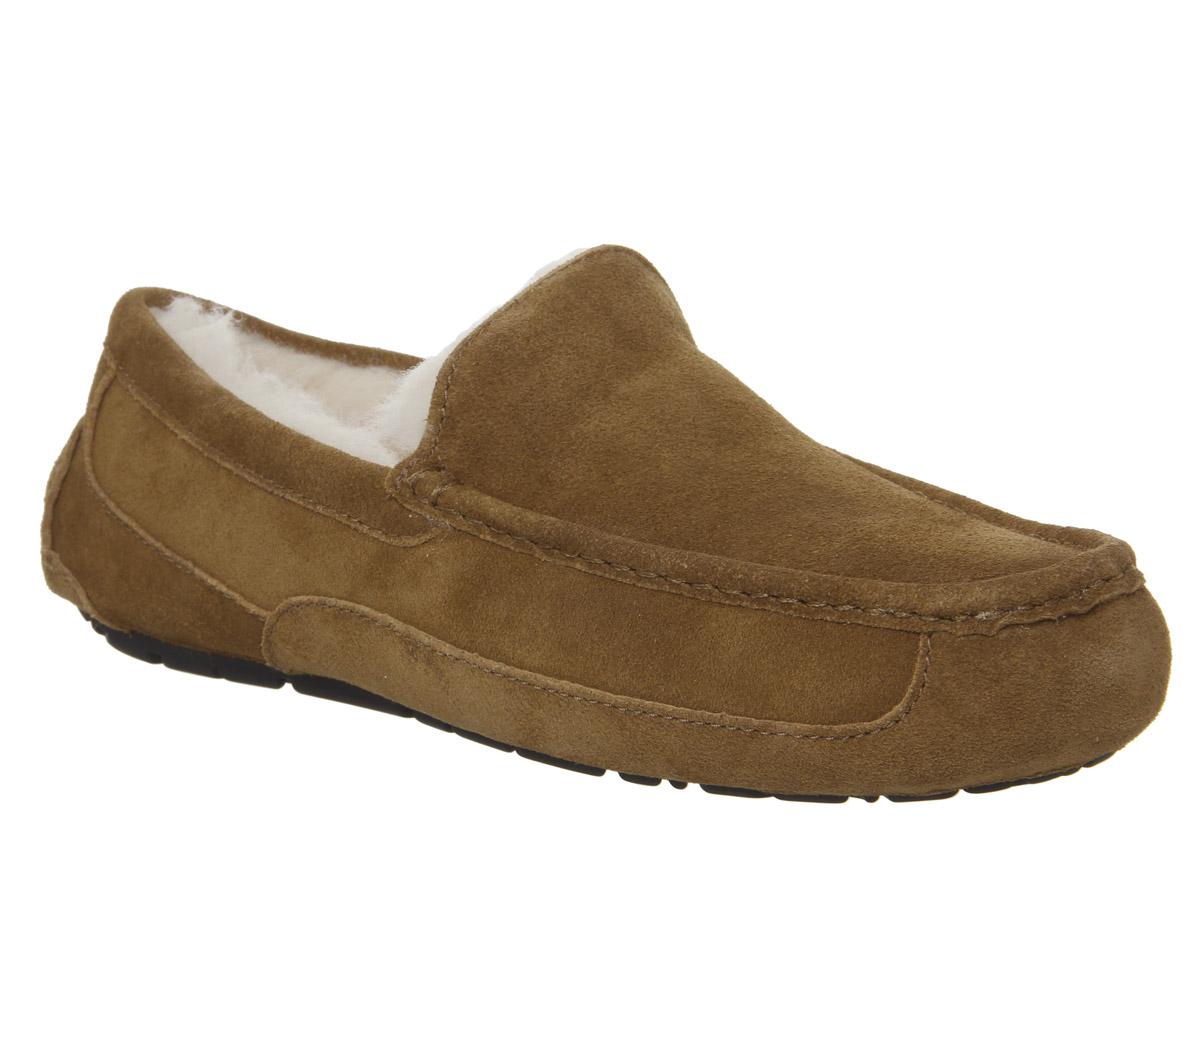 UGG Ascot Slippers Chestnut Suede New 